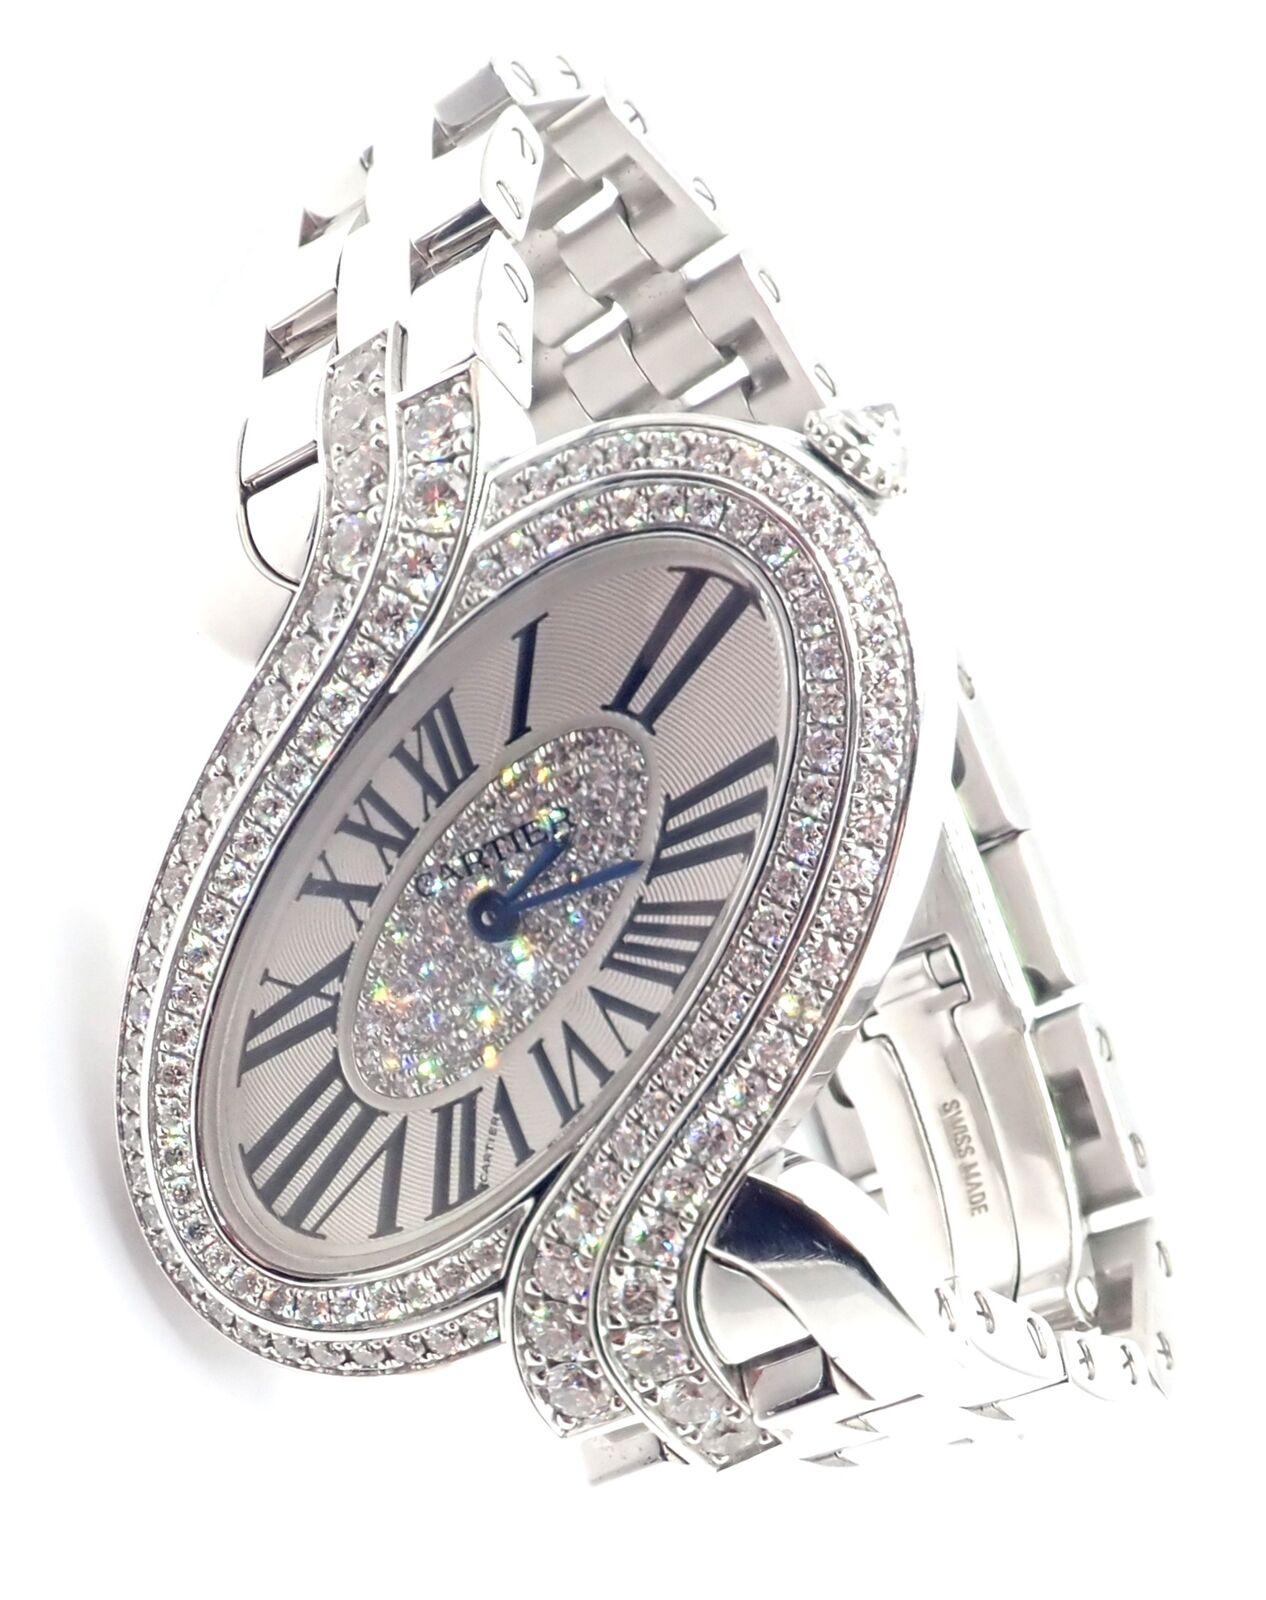 18k White Gold Diamond Delices de Cartier Wristwatch by Cartier 3380.
Works great, fully functional, absolutely mint, like new condition.
Includes Cartier Watch Box.
Original Retail Price: $72,000
With Round Brilliant Cut Diamonds VVS1 clarity, E